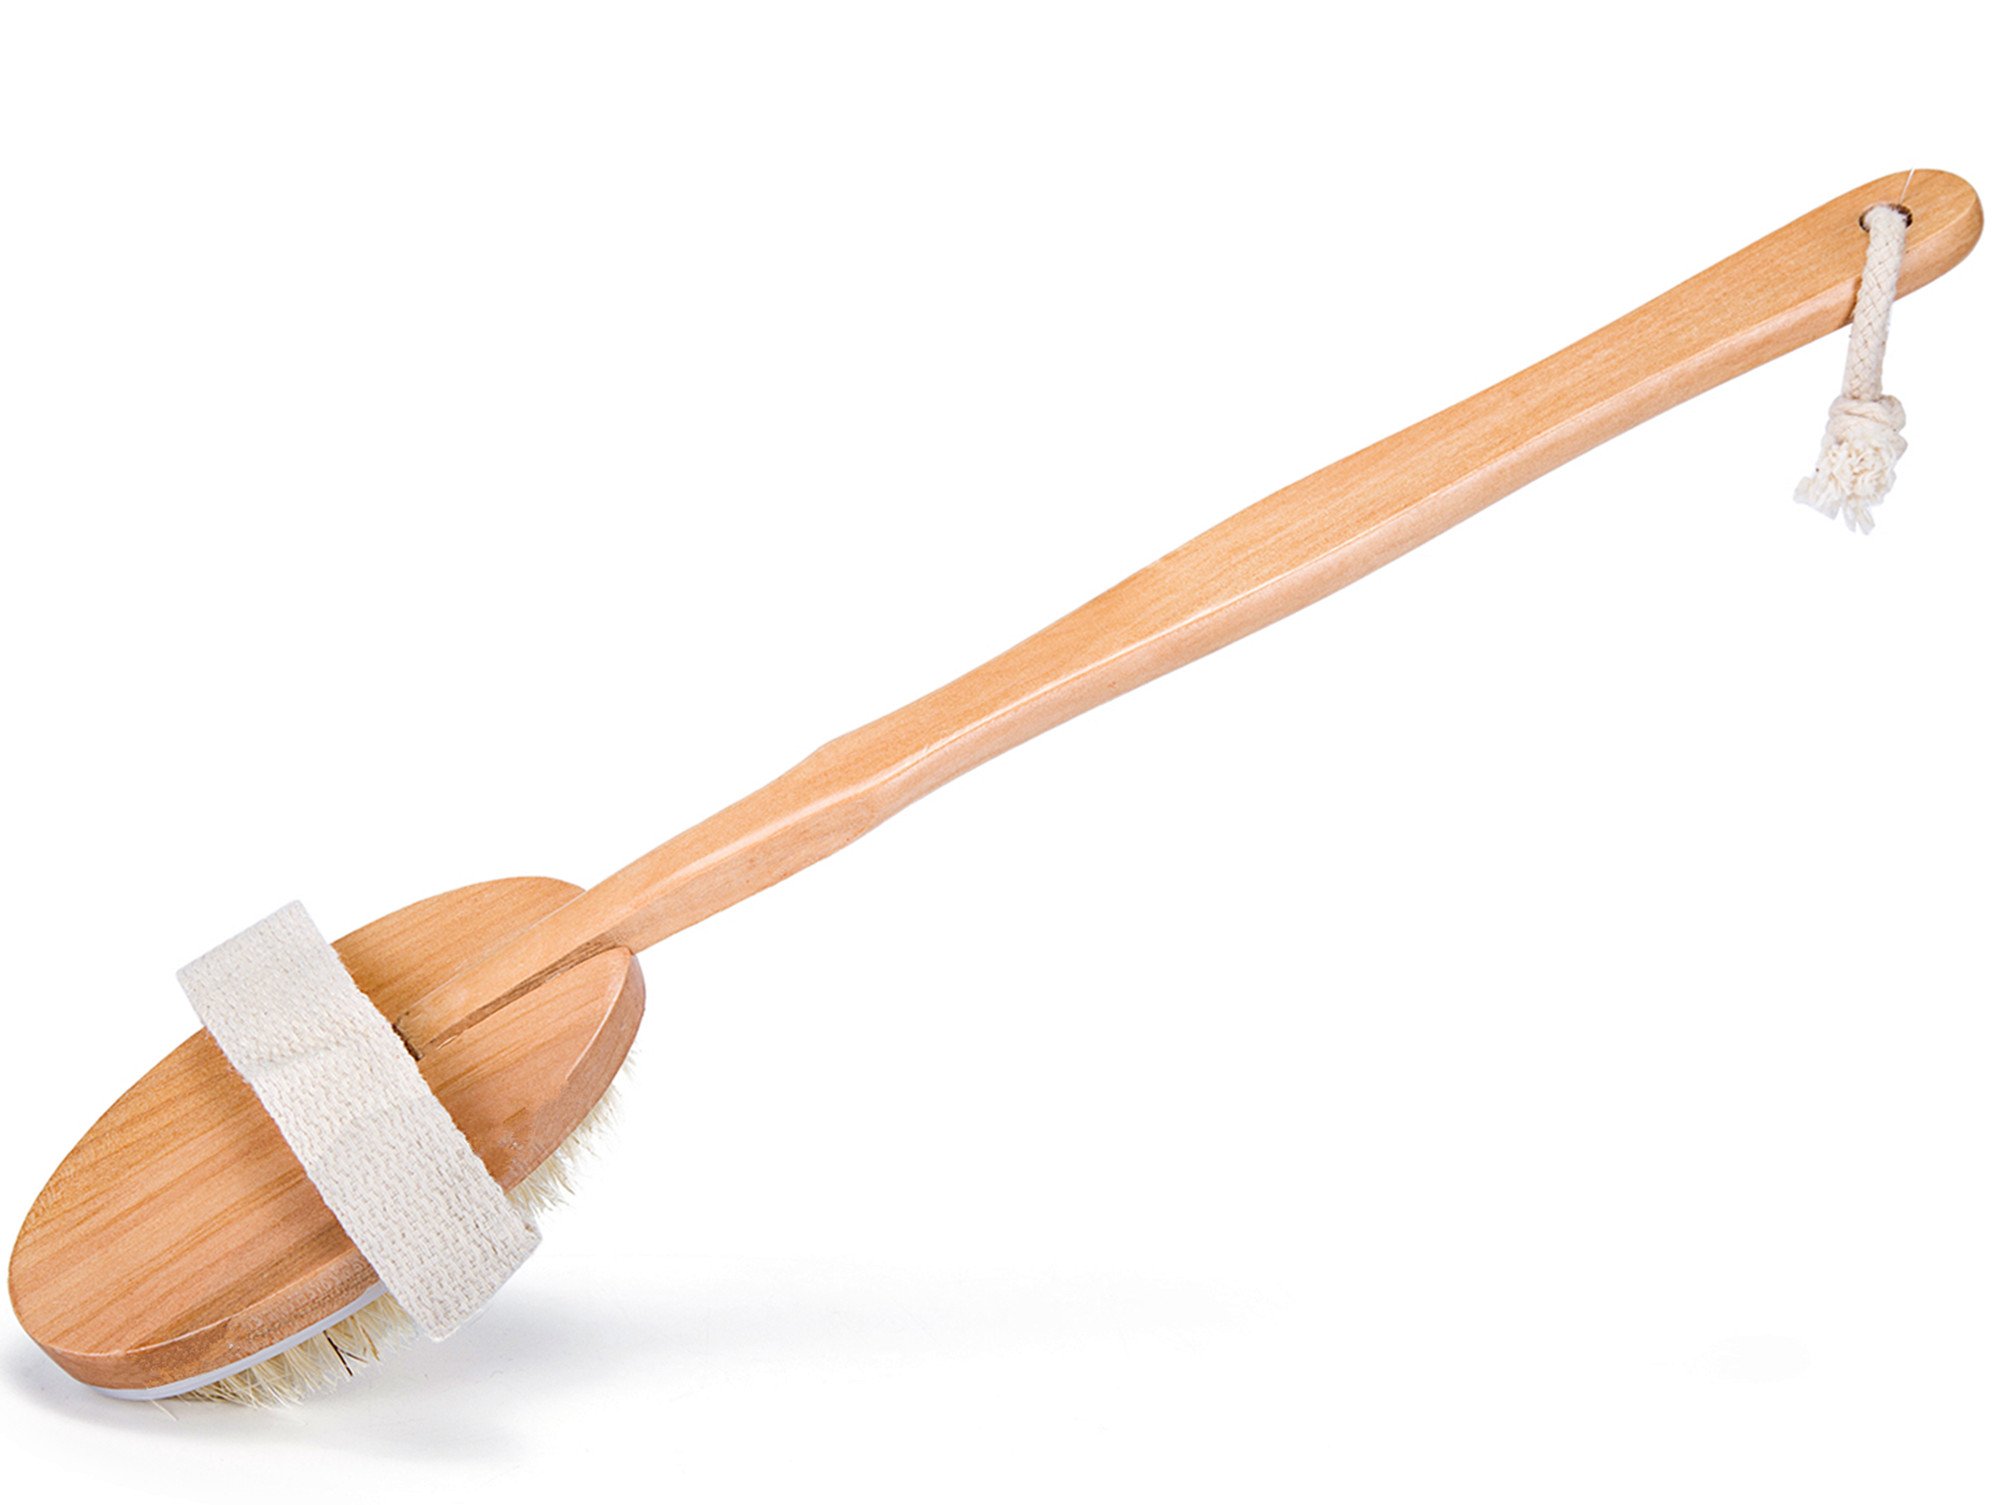 Wooden Shower Body Brush with Boar Bristle Made by Mira with Detachable Hand Grip Handle, Perfect for Dry Skin Brushing, Shower and Bath, an Essential for Cellulite Reduction, Skin Exfoliation (Wood)